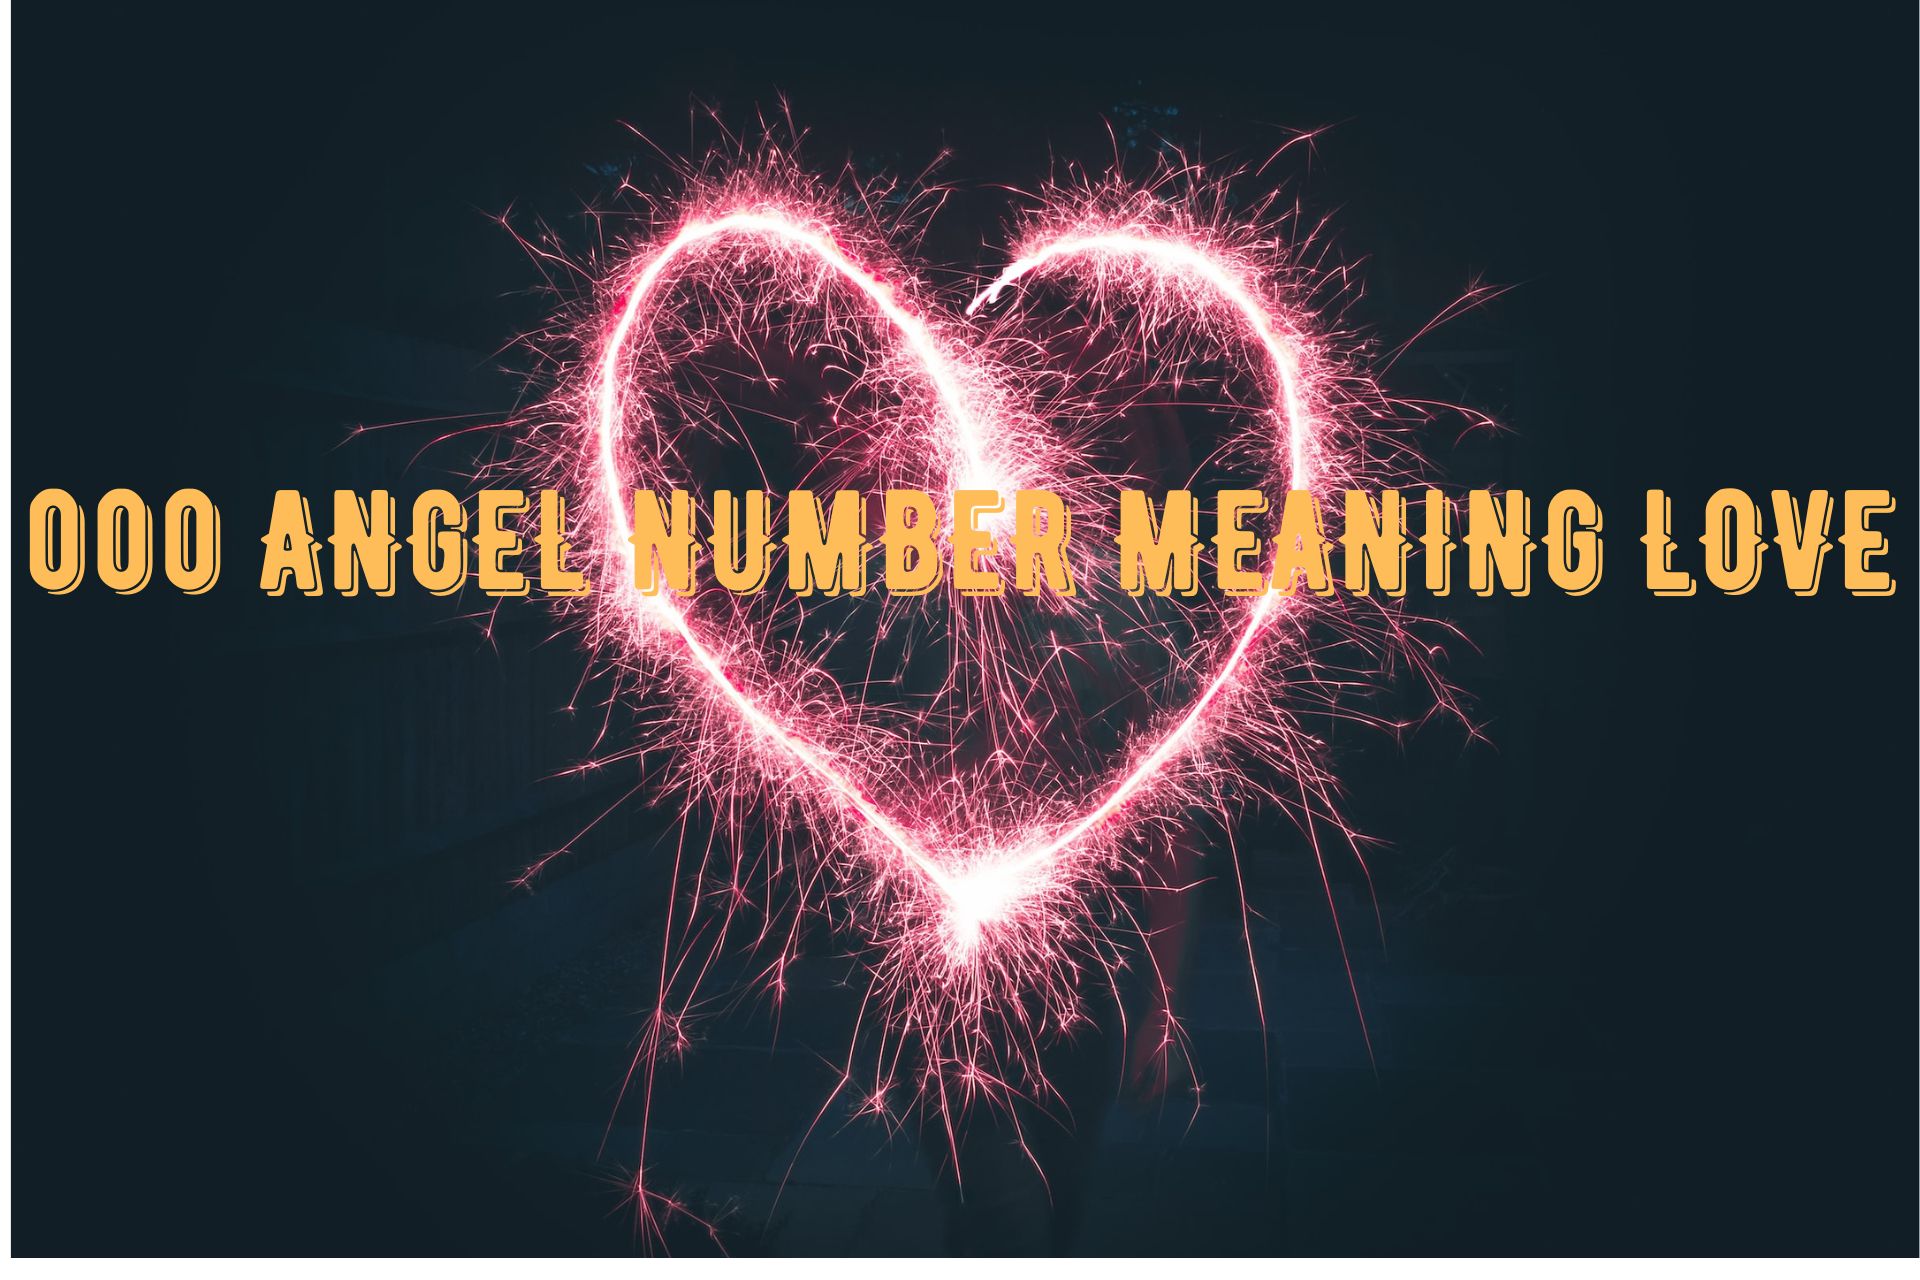 000 Angel Number Meaning Love - A Message From Your Guardian Angels